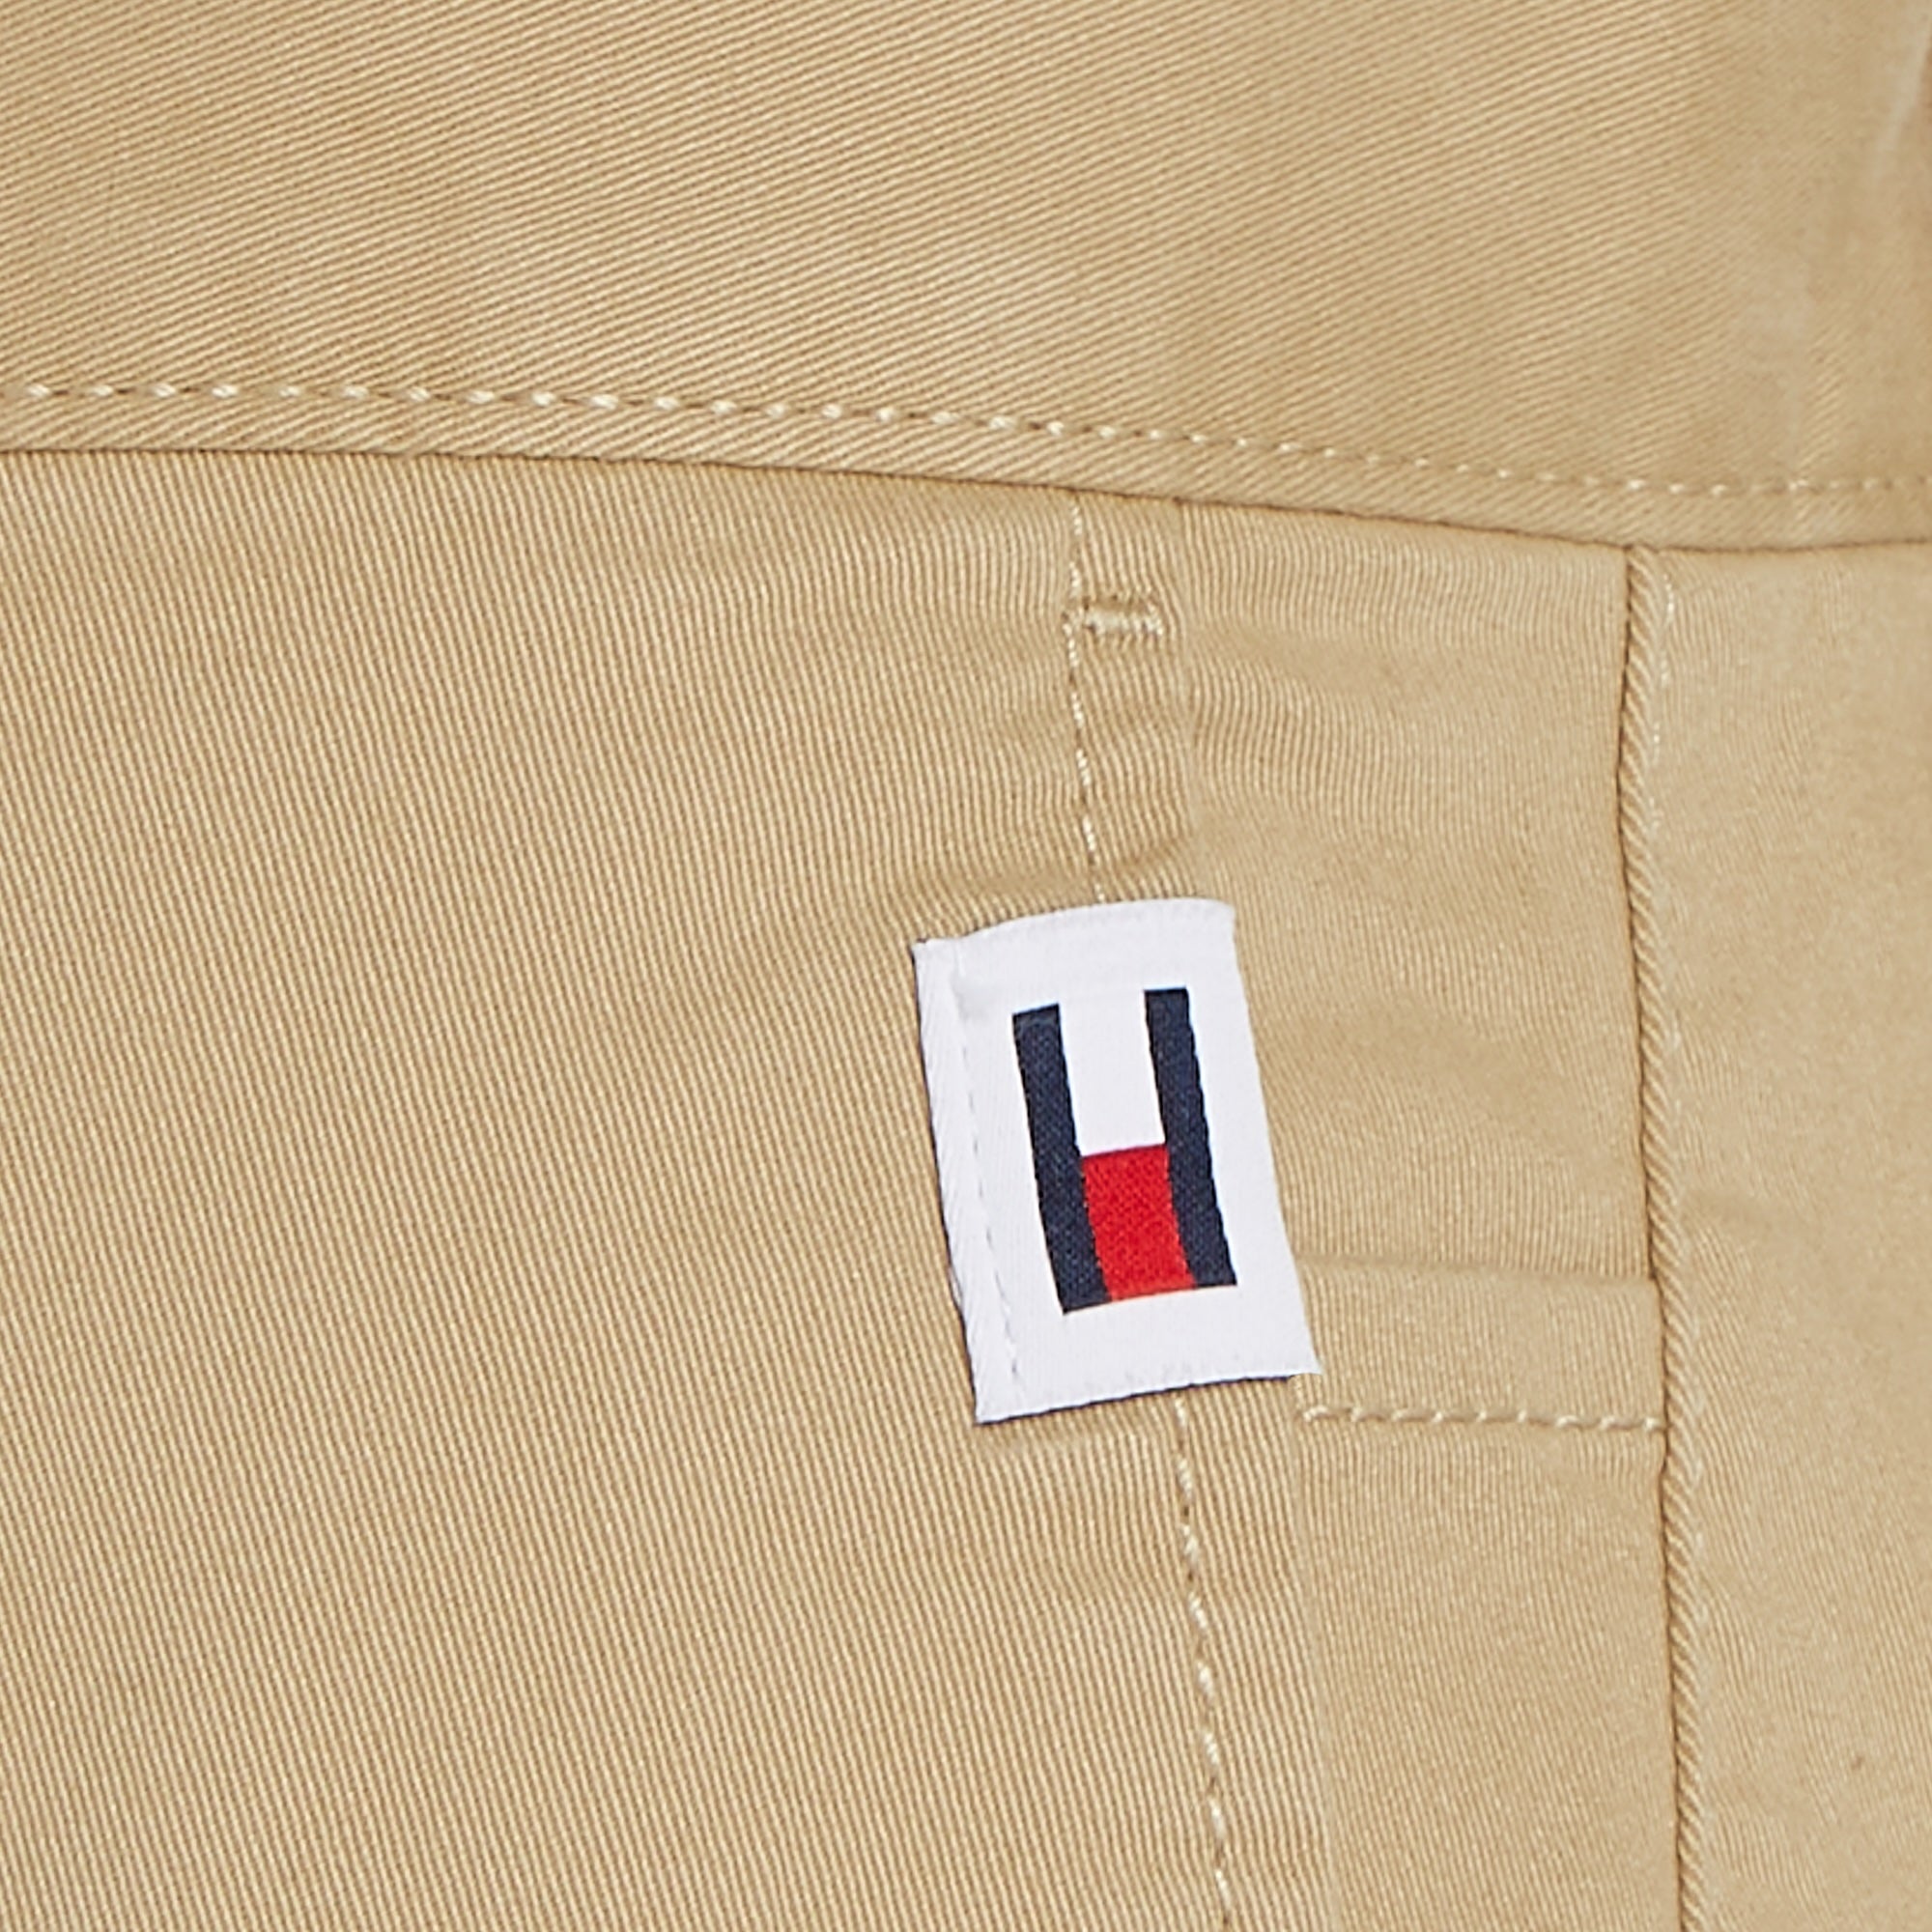 Tommy Jeans Scanton Chino Shorts - Tawny Sand